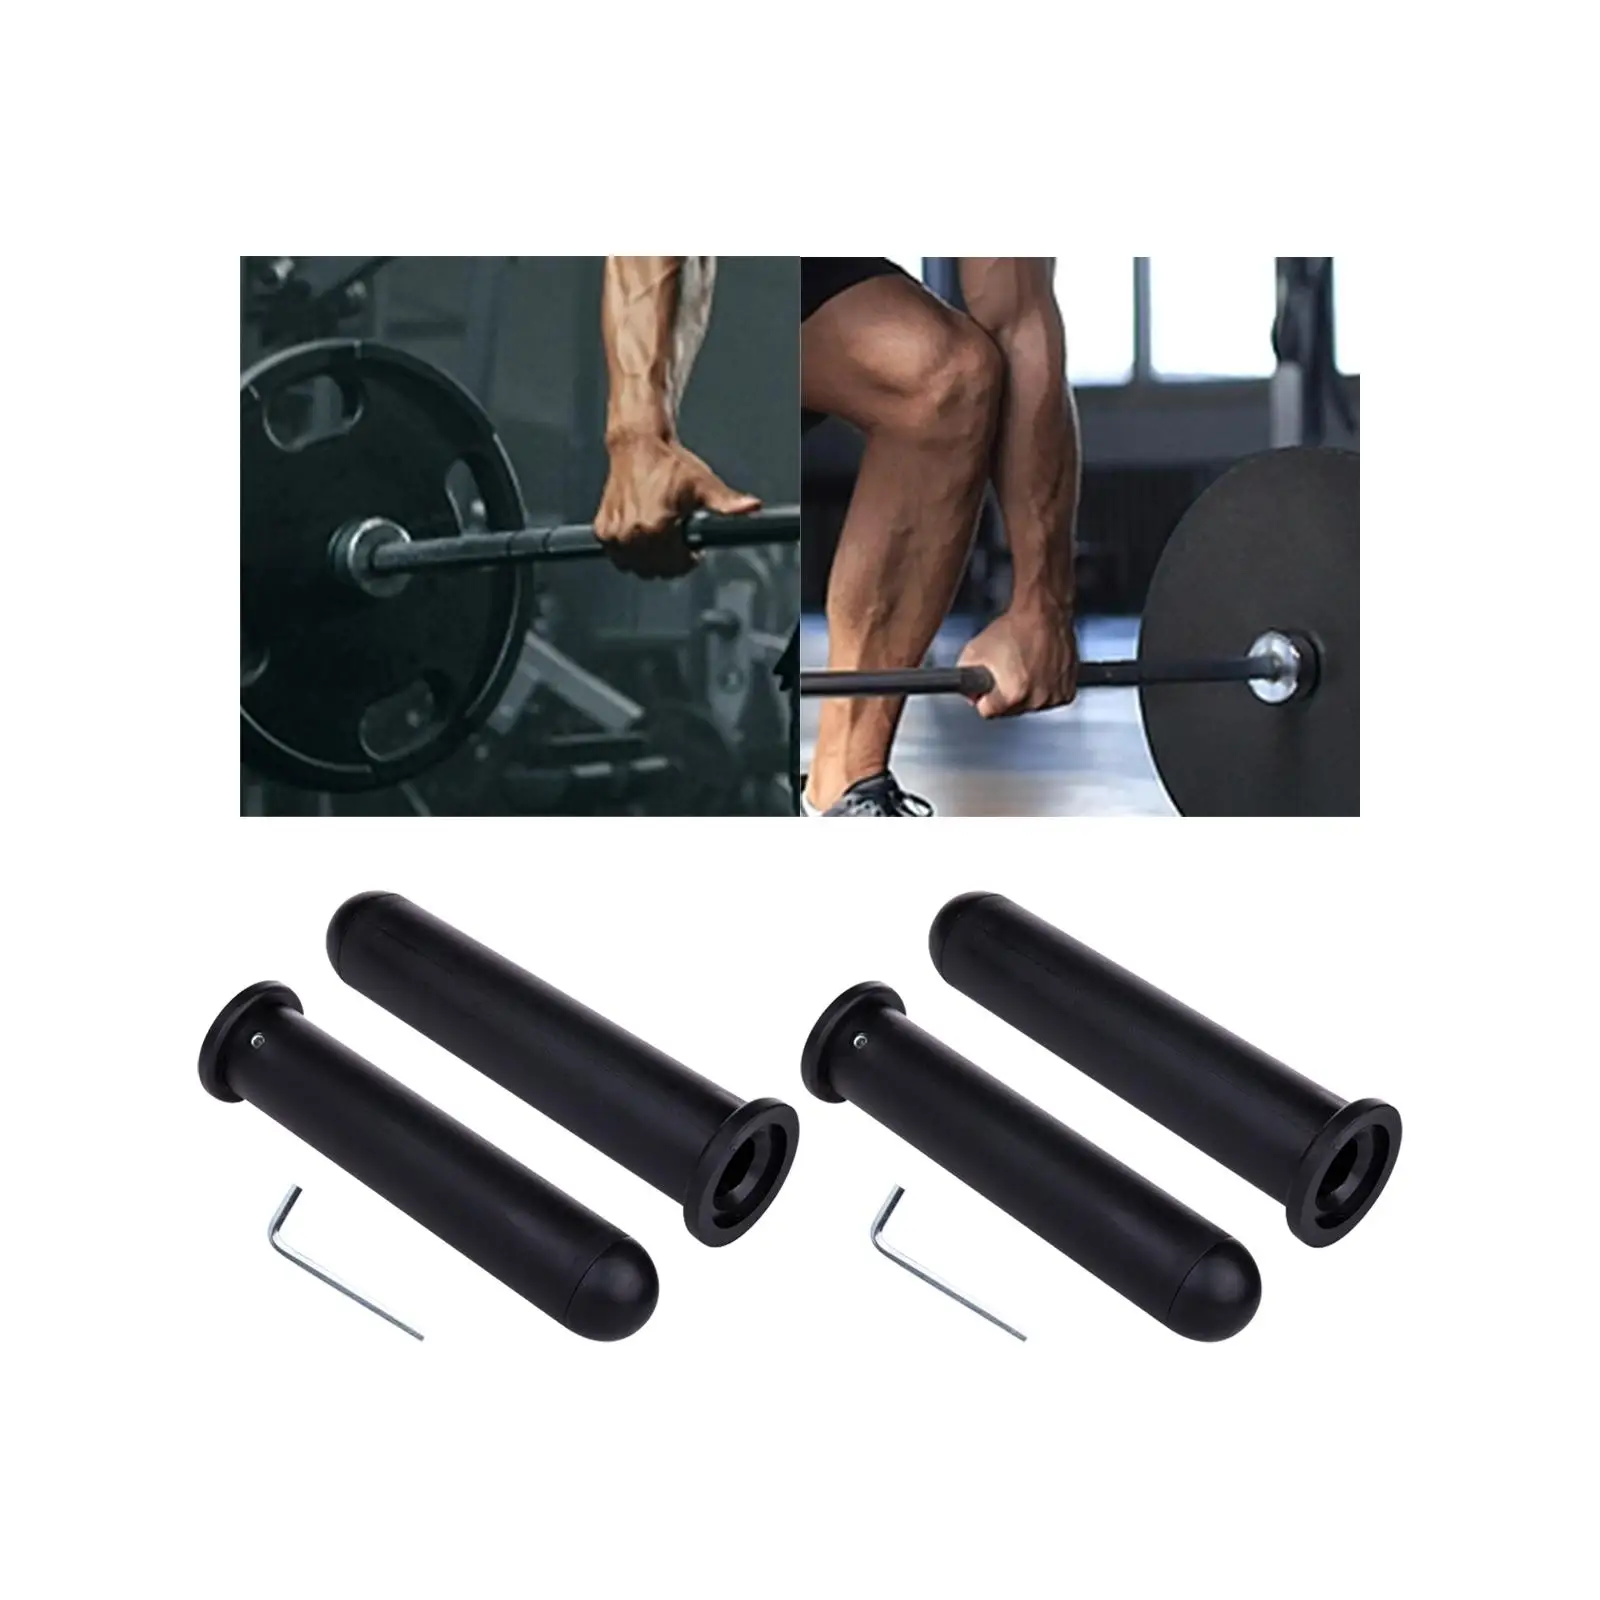 Barbell Adapter Sleeves Strength Training Barbell Attachment Converts Bars to Weight for Women Men Dumbbells Weight Plate Posts